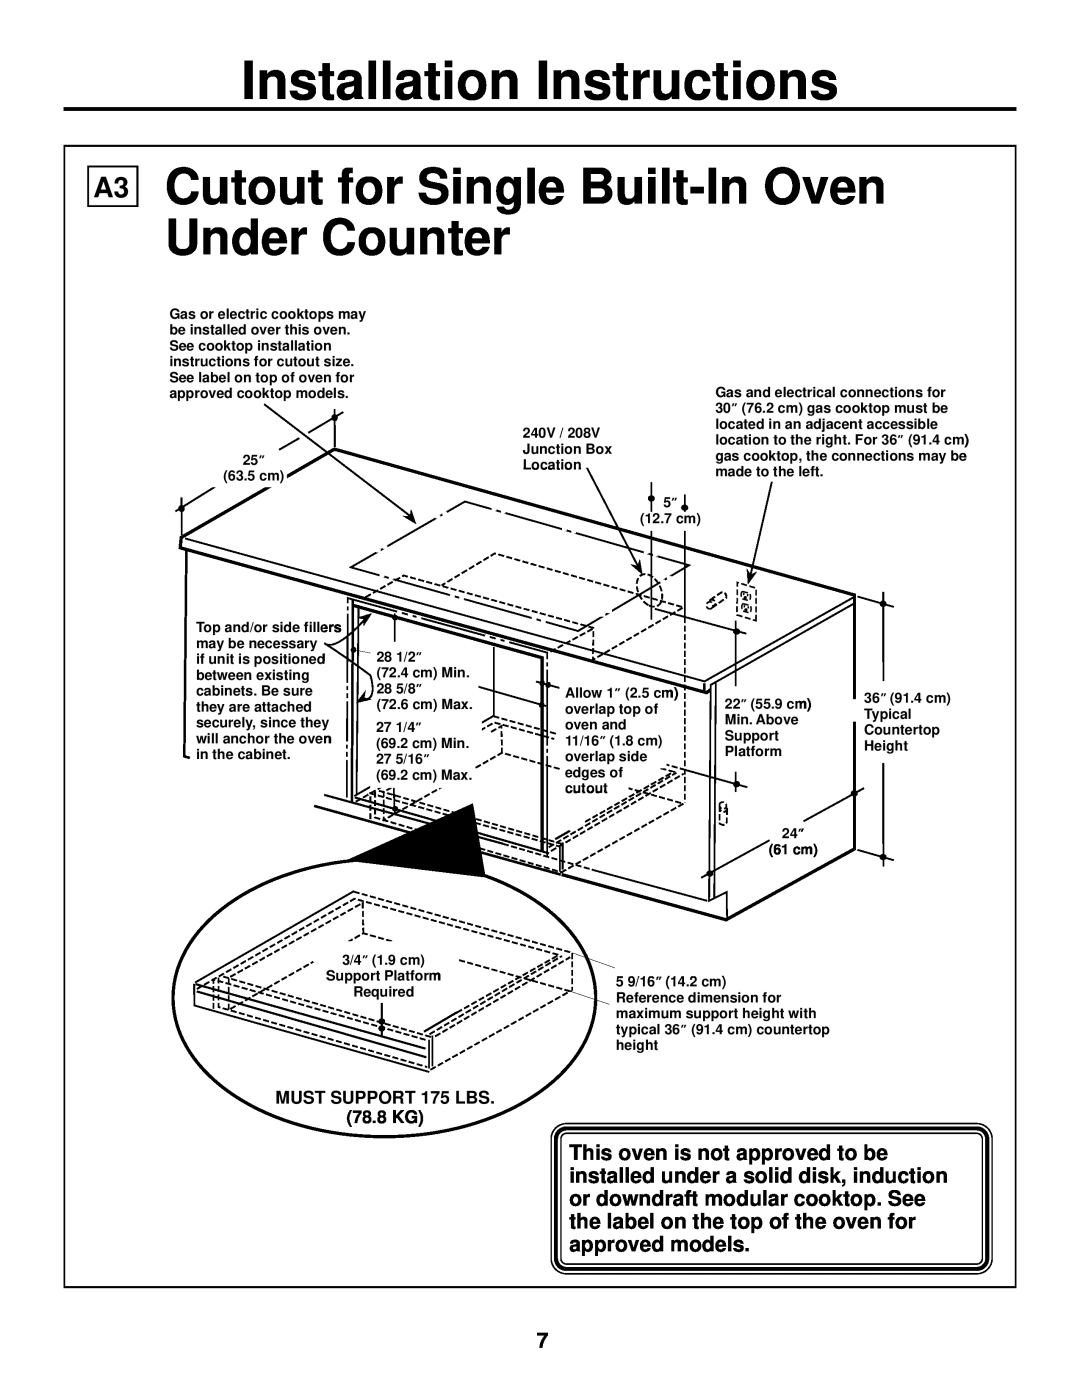 GE ZET1, ZET2 installation instructions Cutout for Single Built-In Oven Under Counter, Installation Instructions 